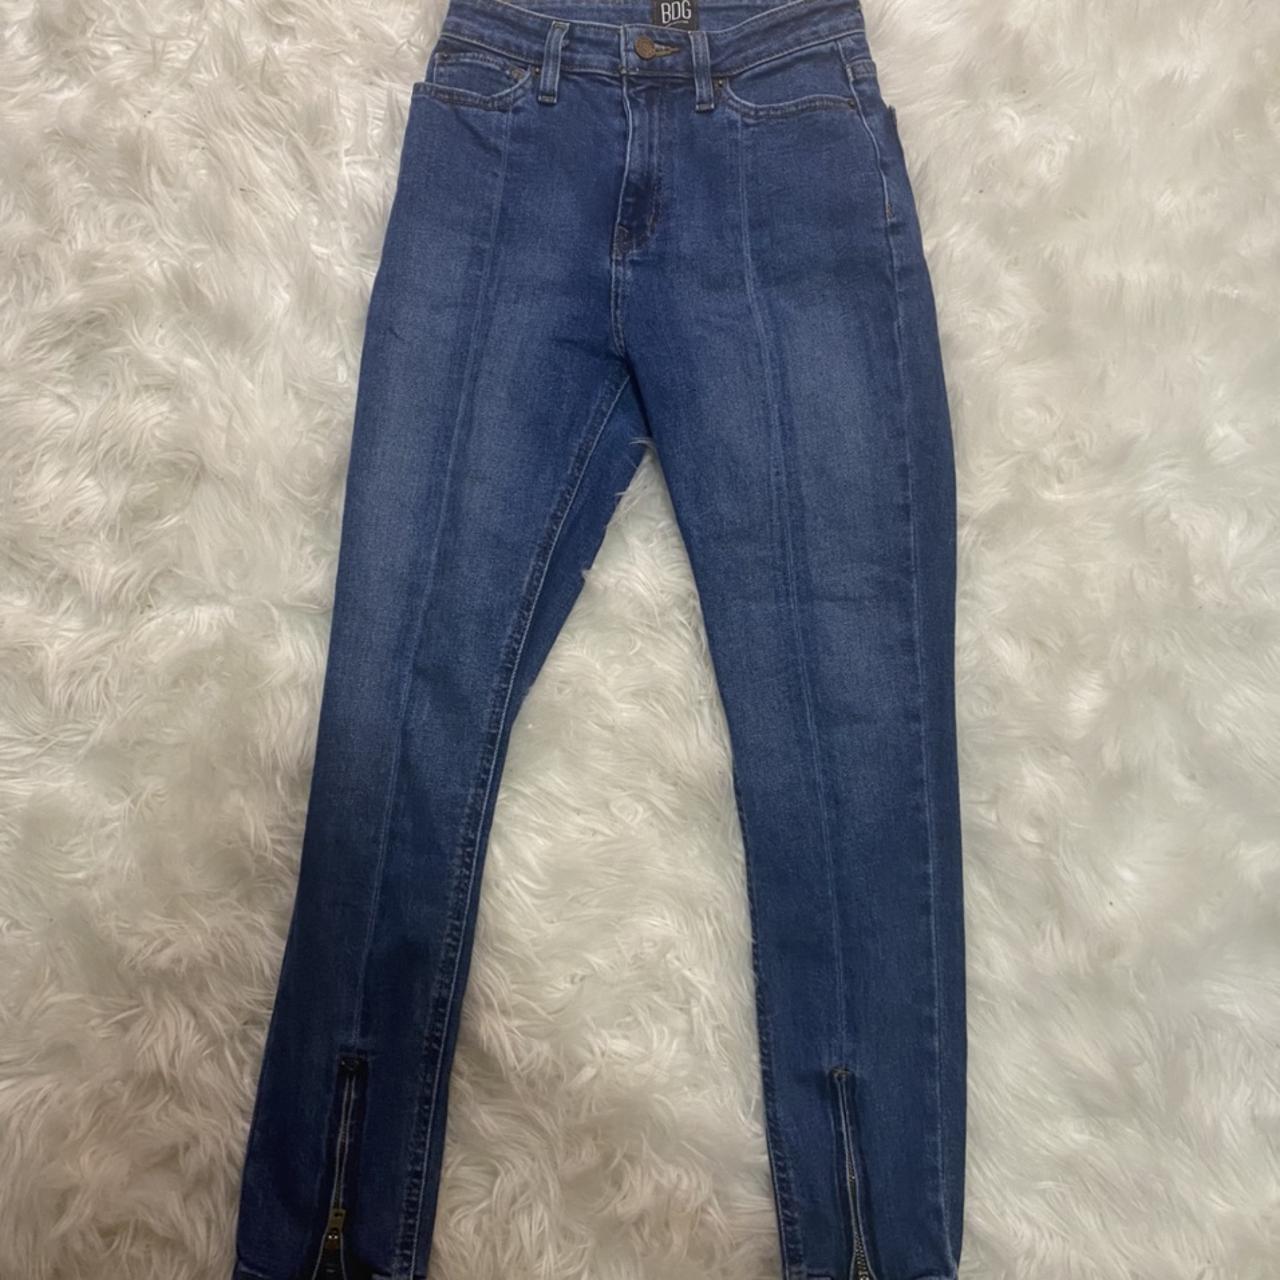 BDG girlfriend high rise jeans. These have such fun... - Depop